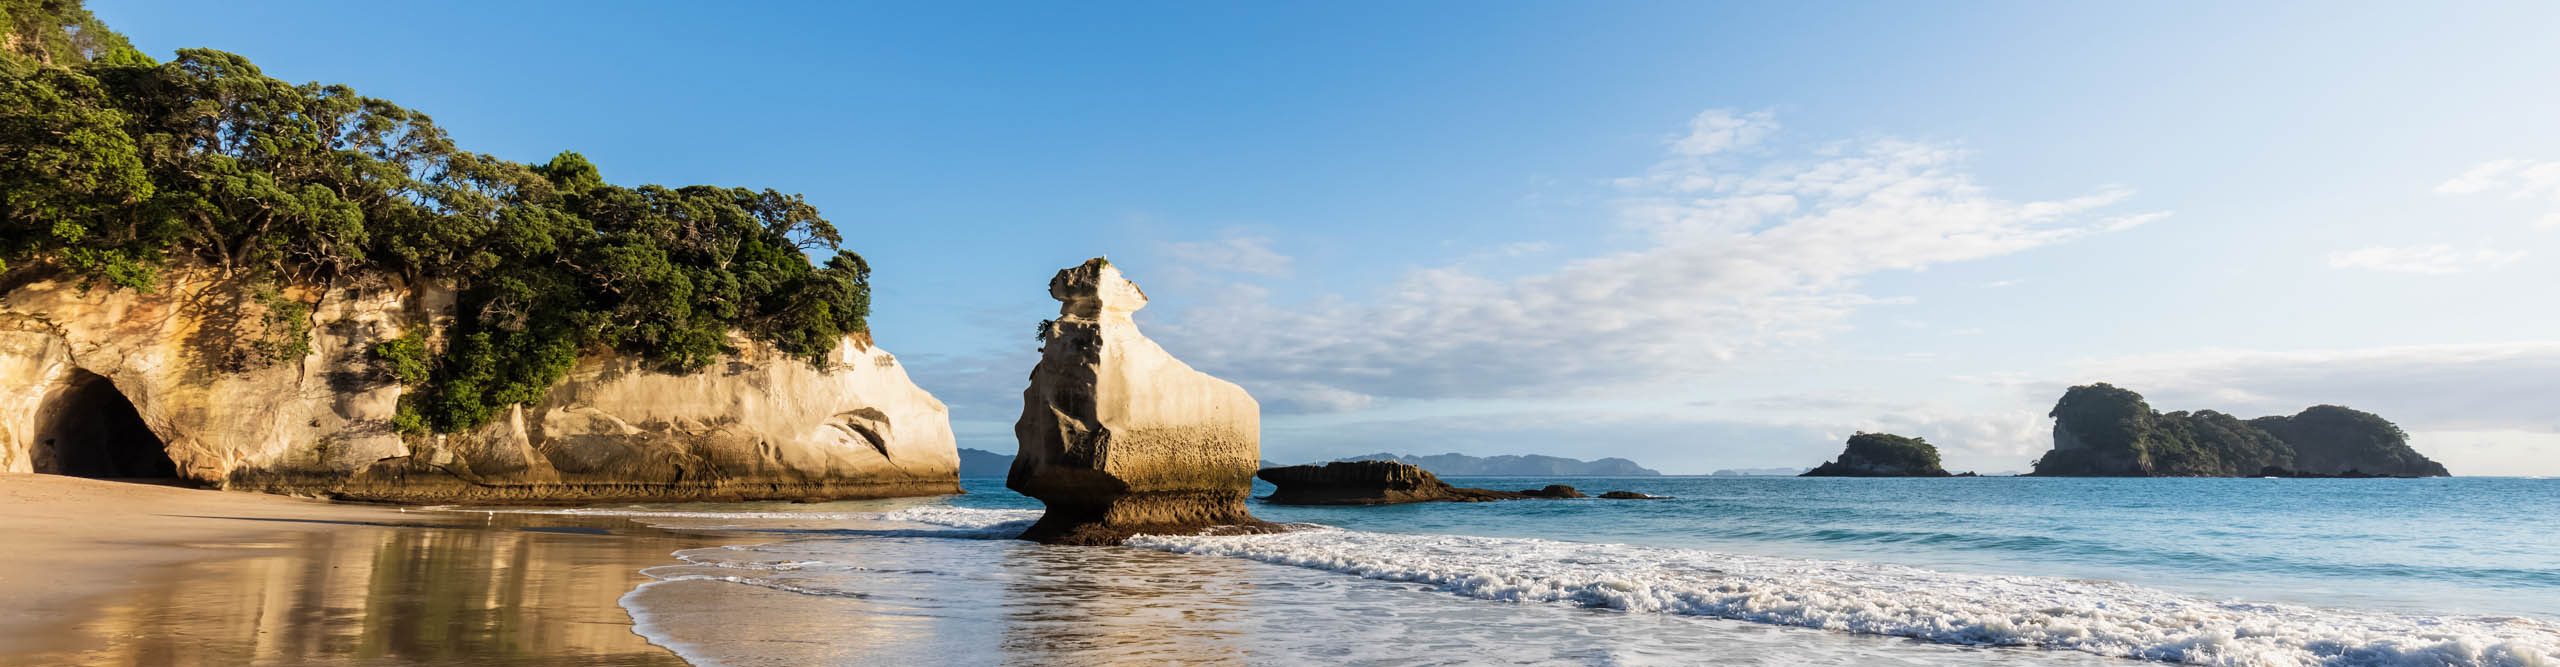 Smiling Sphinx Rock with waves crashing in the late afternoon sun, Cathedral Cove, New Zealand 